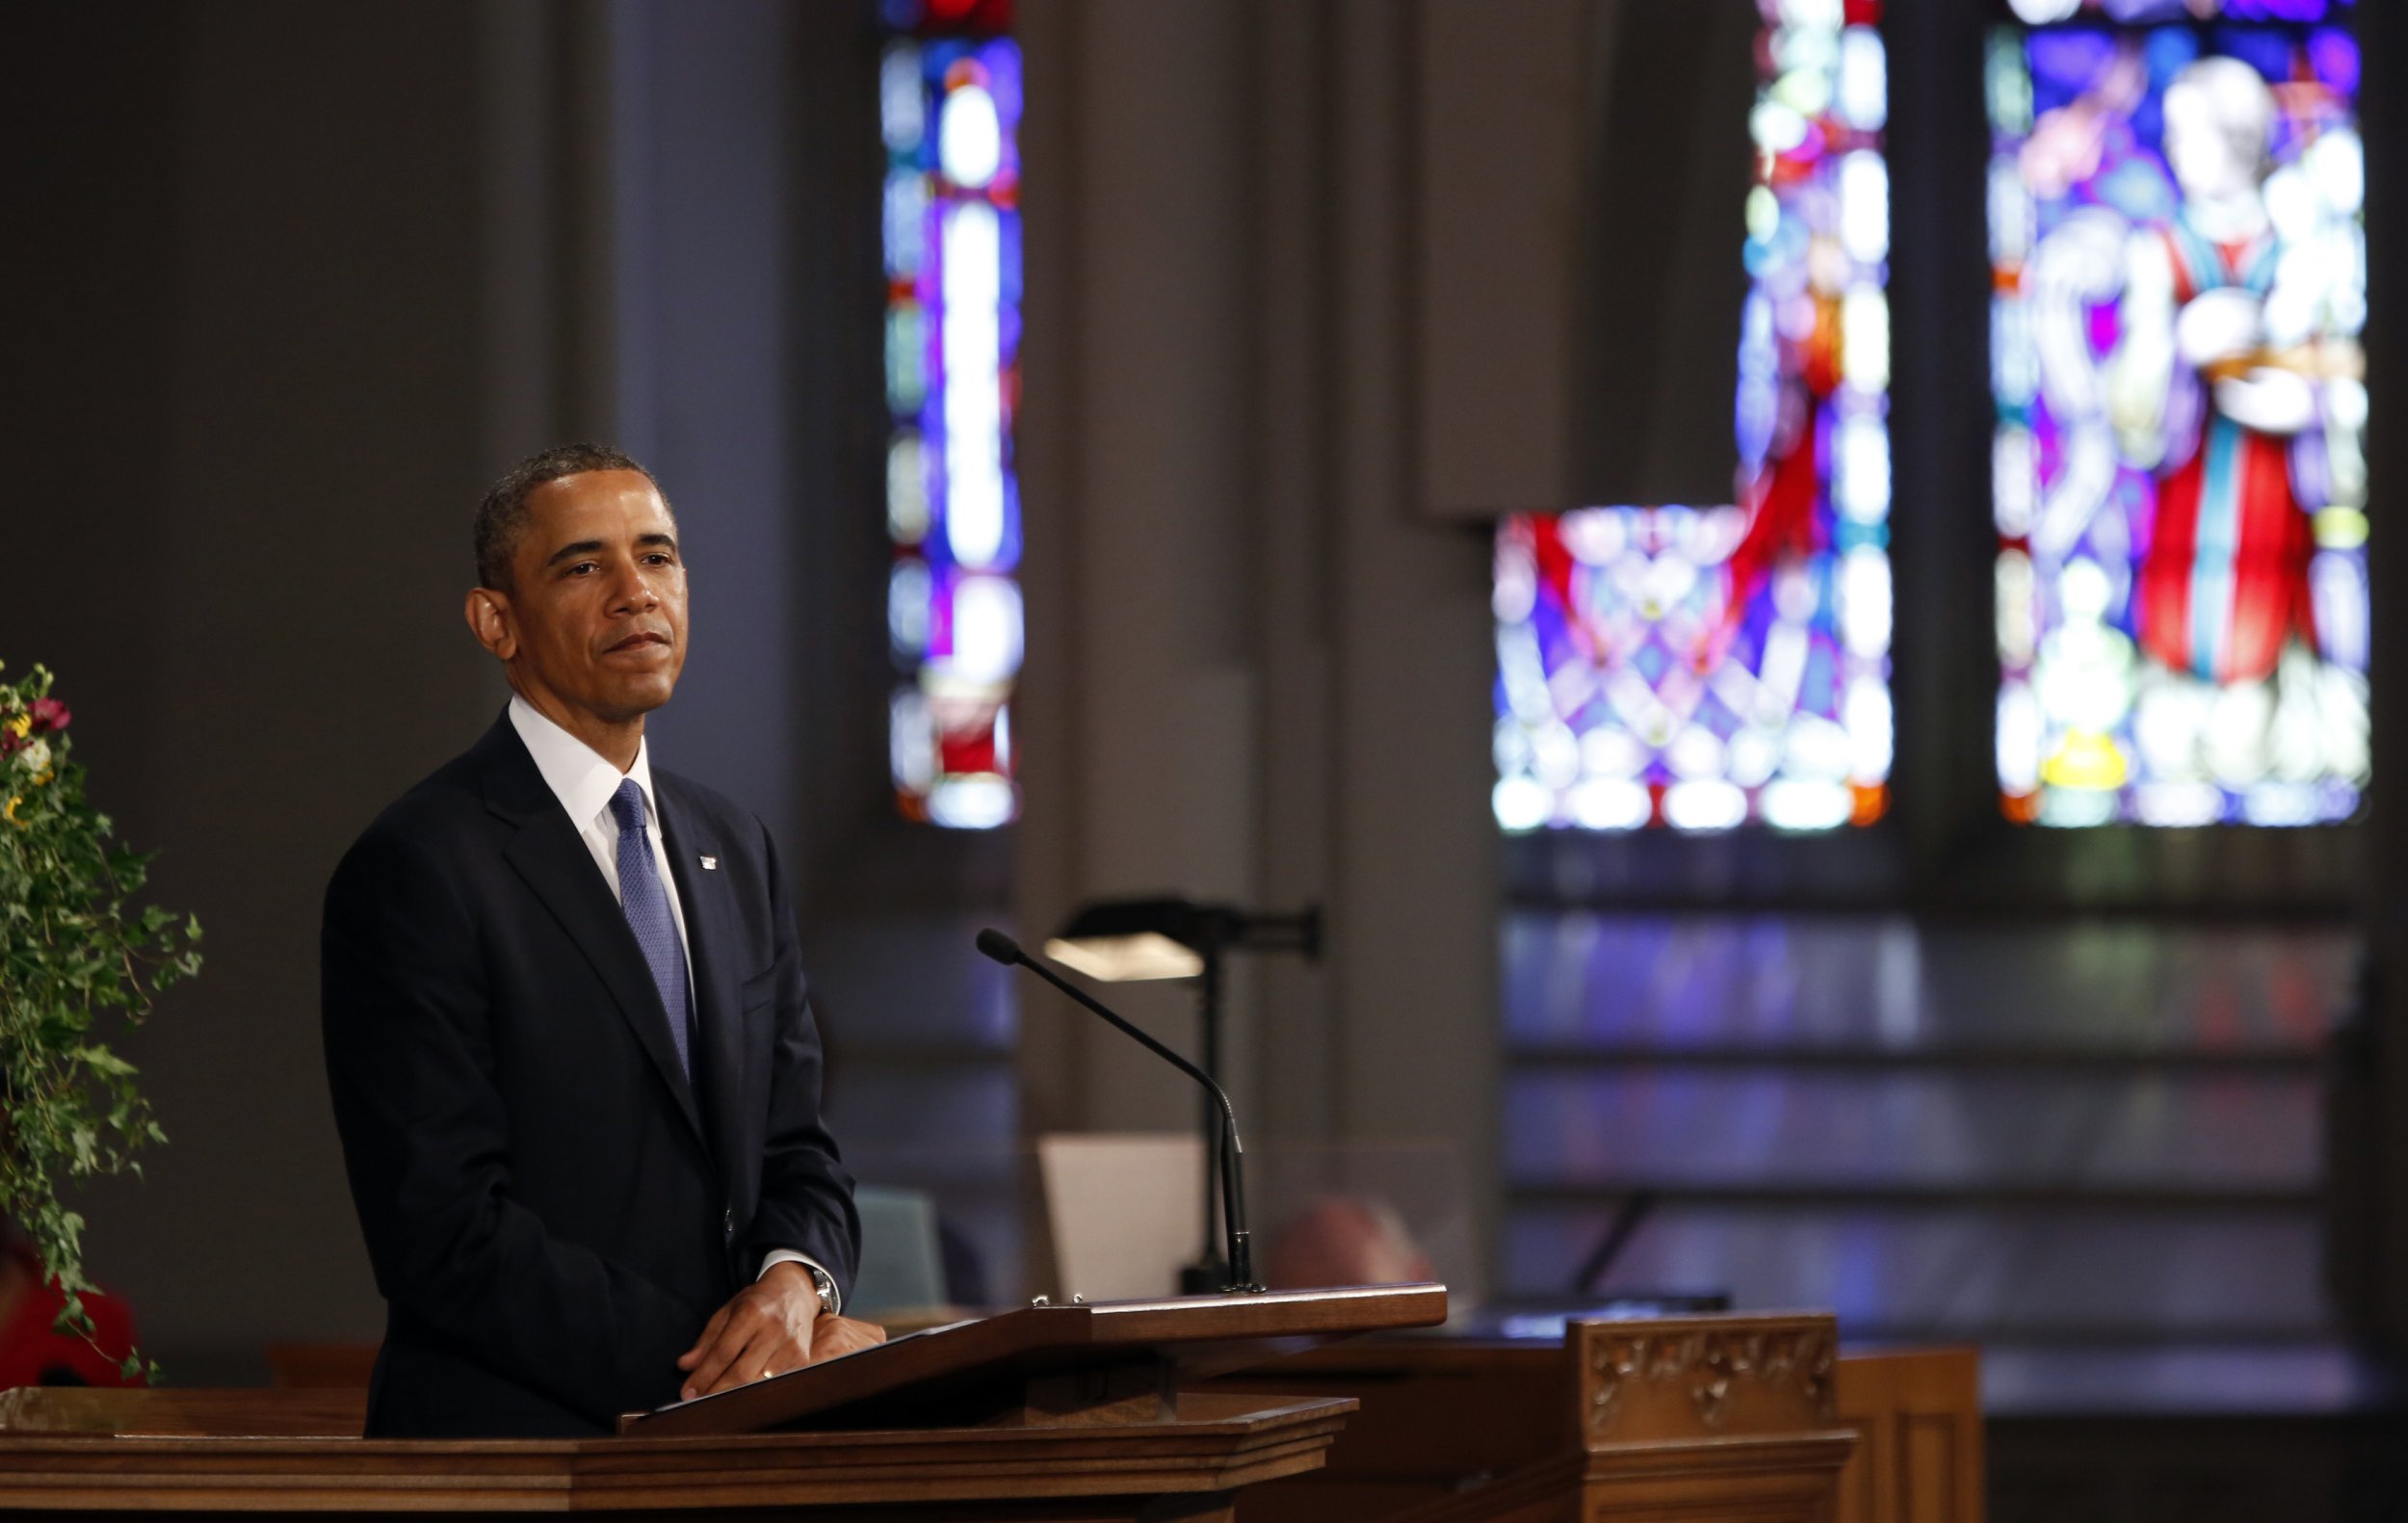 Boston Marathon Bombings President Obama’s Speech In Cathedral Of The